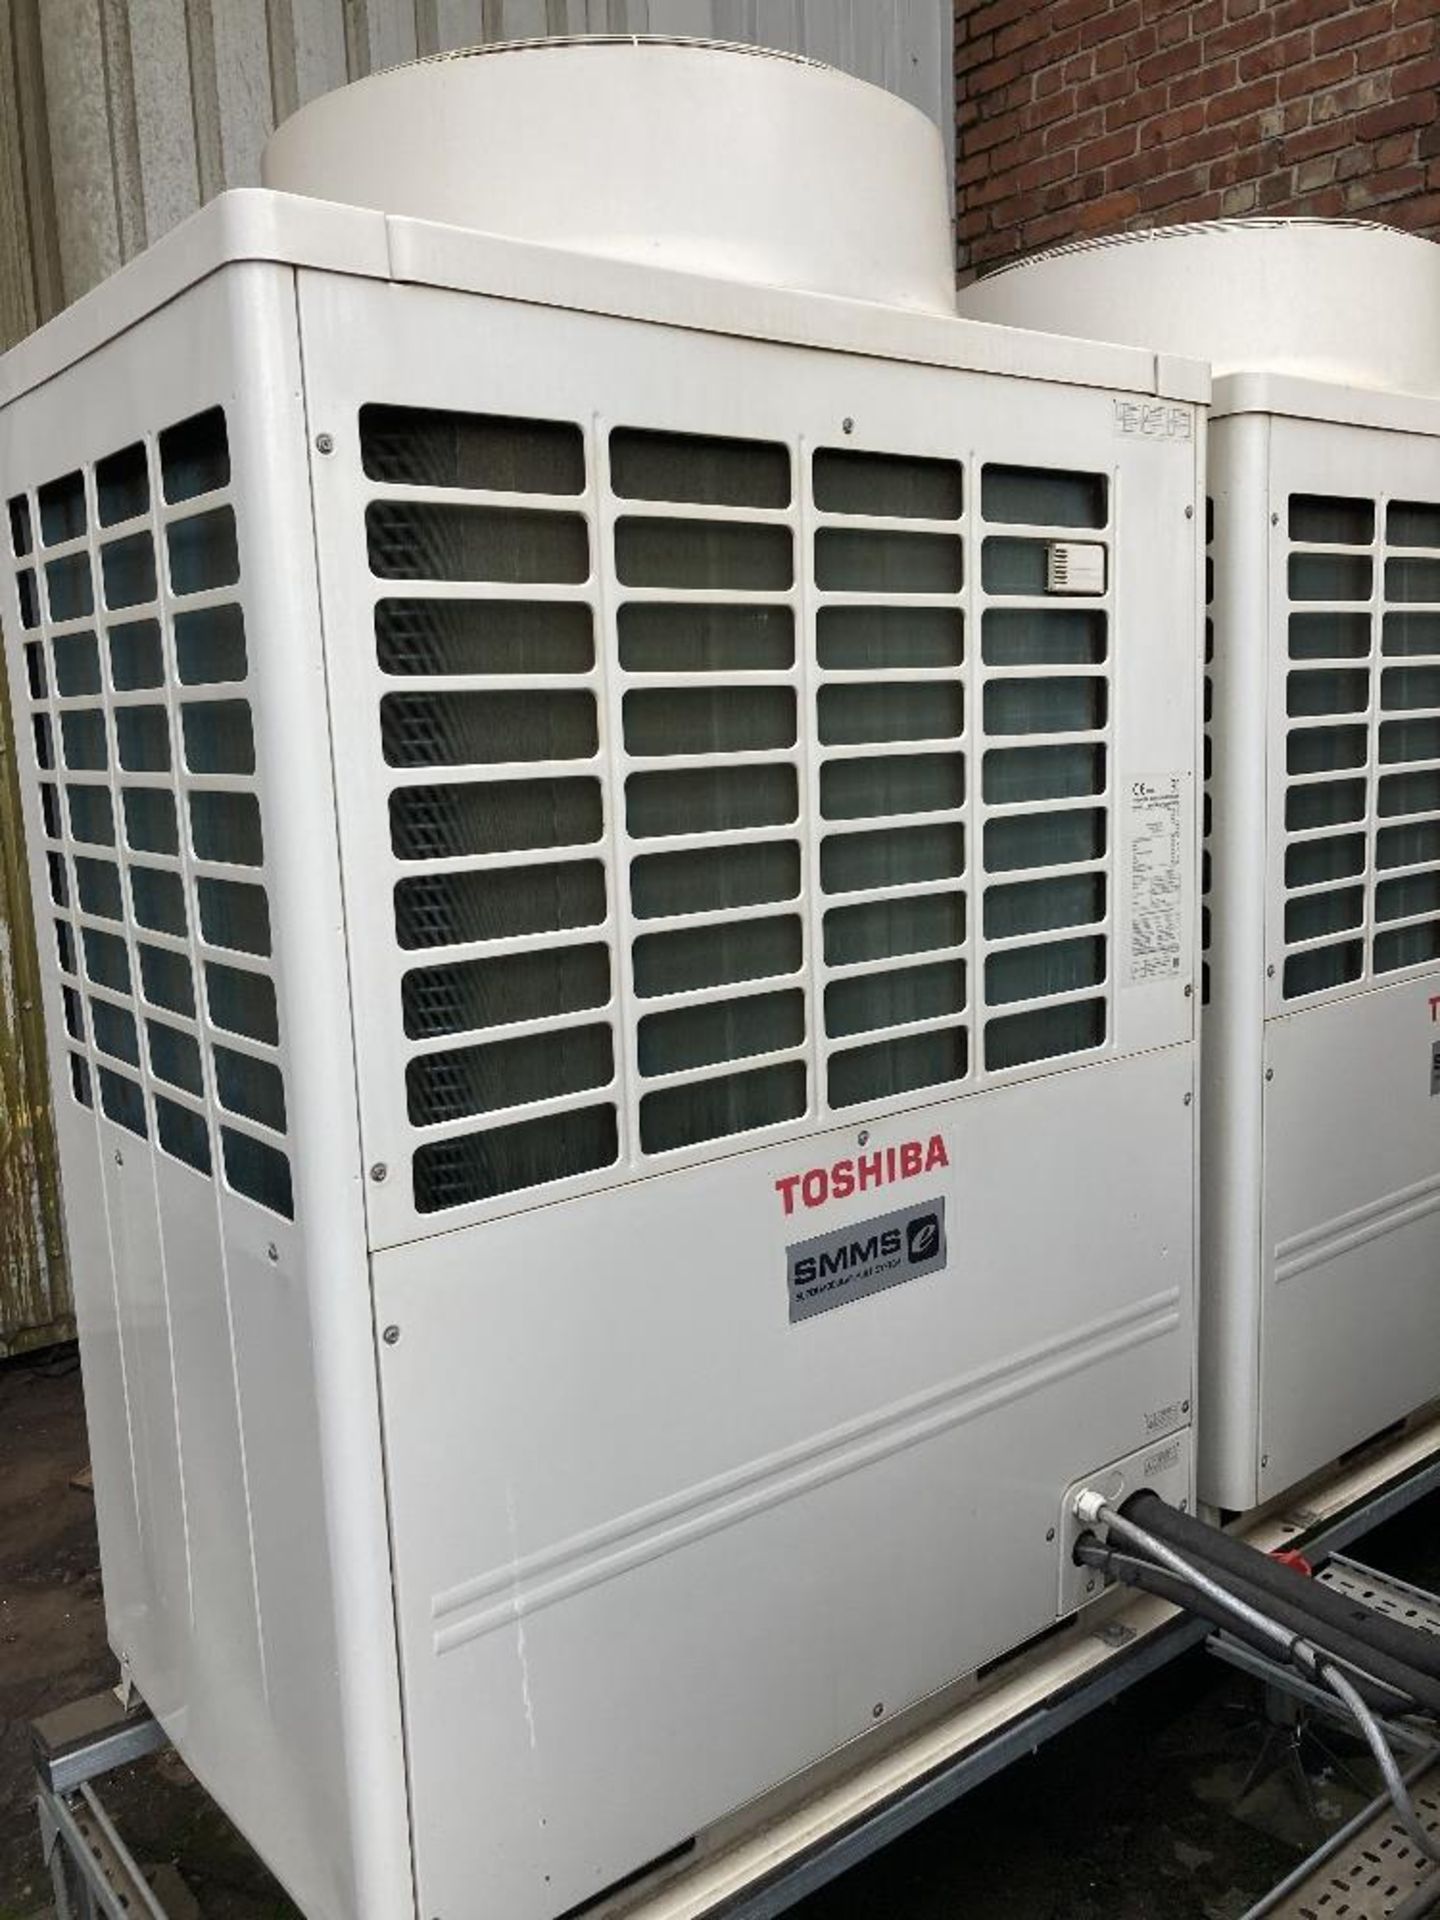 Toshiba VRF Air Conditioning System - Image 10 of 17